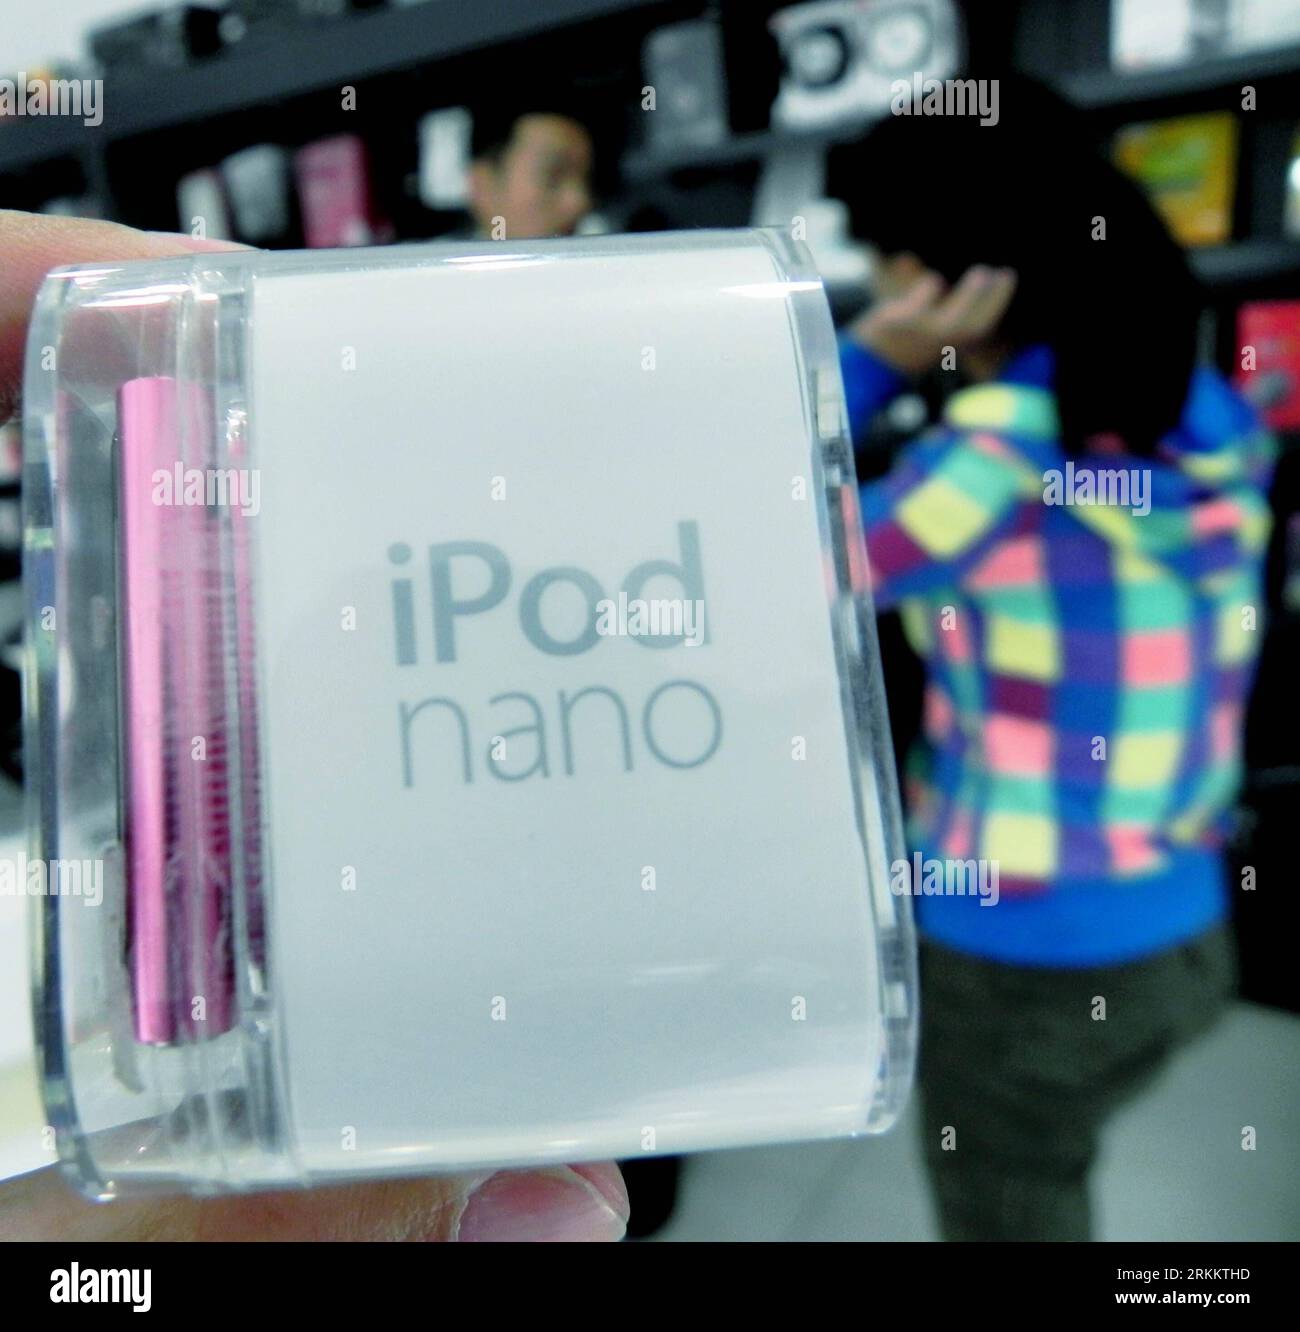 Bildnummer: 56276143  Datum: 13.11.2011  Copyright: imago/Xinhua (111113) -- HANGZHOU, Nov. 13, 2011 (Xinhua) -- Photo taken on Nov. 13, 2011 shows an iPod nano music player at an Apple store in Hangzhou, capital of east China s Zhejiang Province. Apple has unveiled a worldwide replacement program for the first-generation iPod nano music player due to overheating battery issues, telling owners to stop using the product and get it replaced for free. Apple has determined that, in very rare cases, the battery in the iPod nano (1st generation) may overheat and pose a safety risk. Affected iPod nan Stock Photo